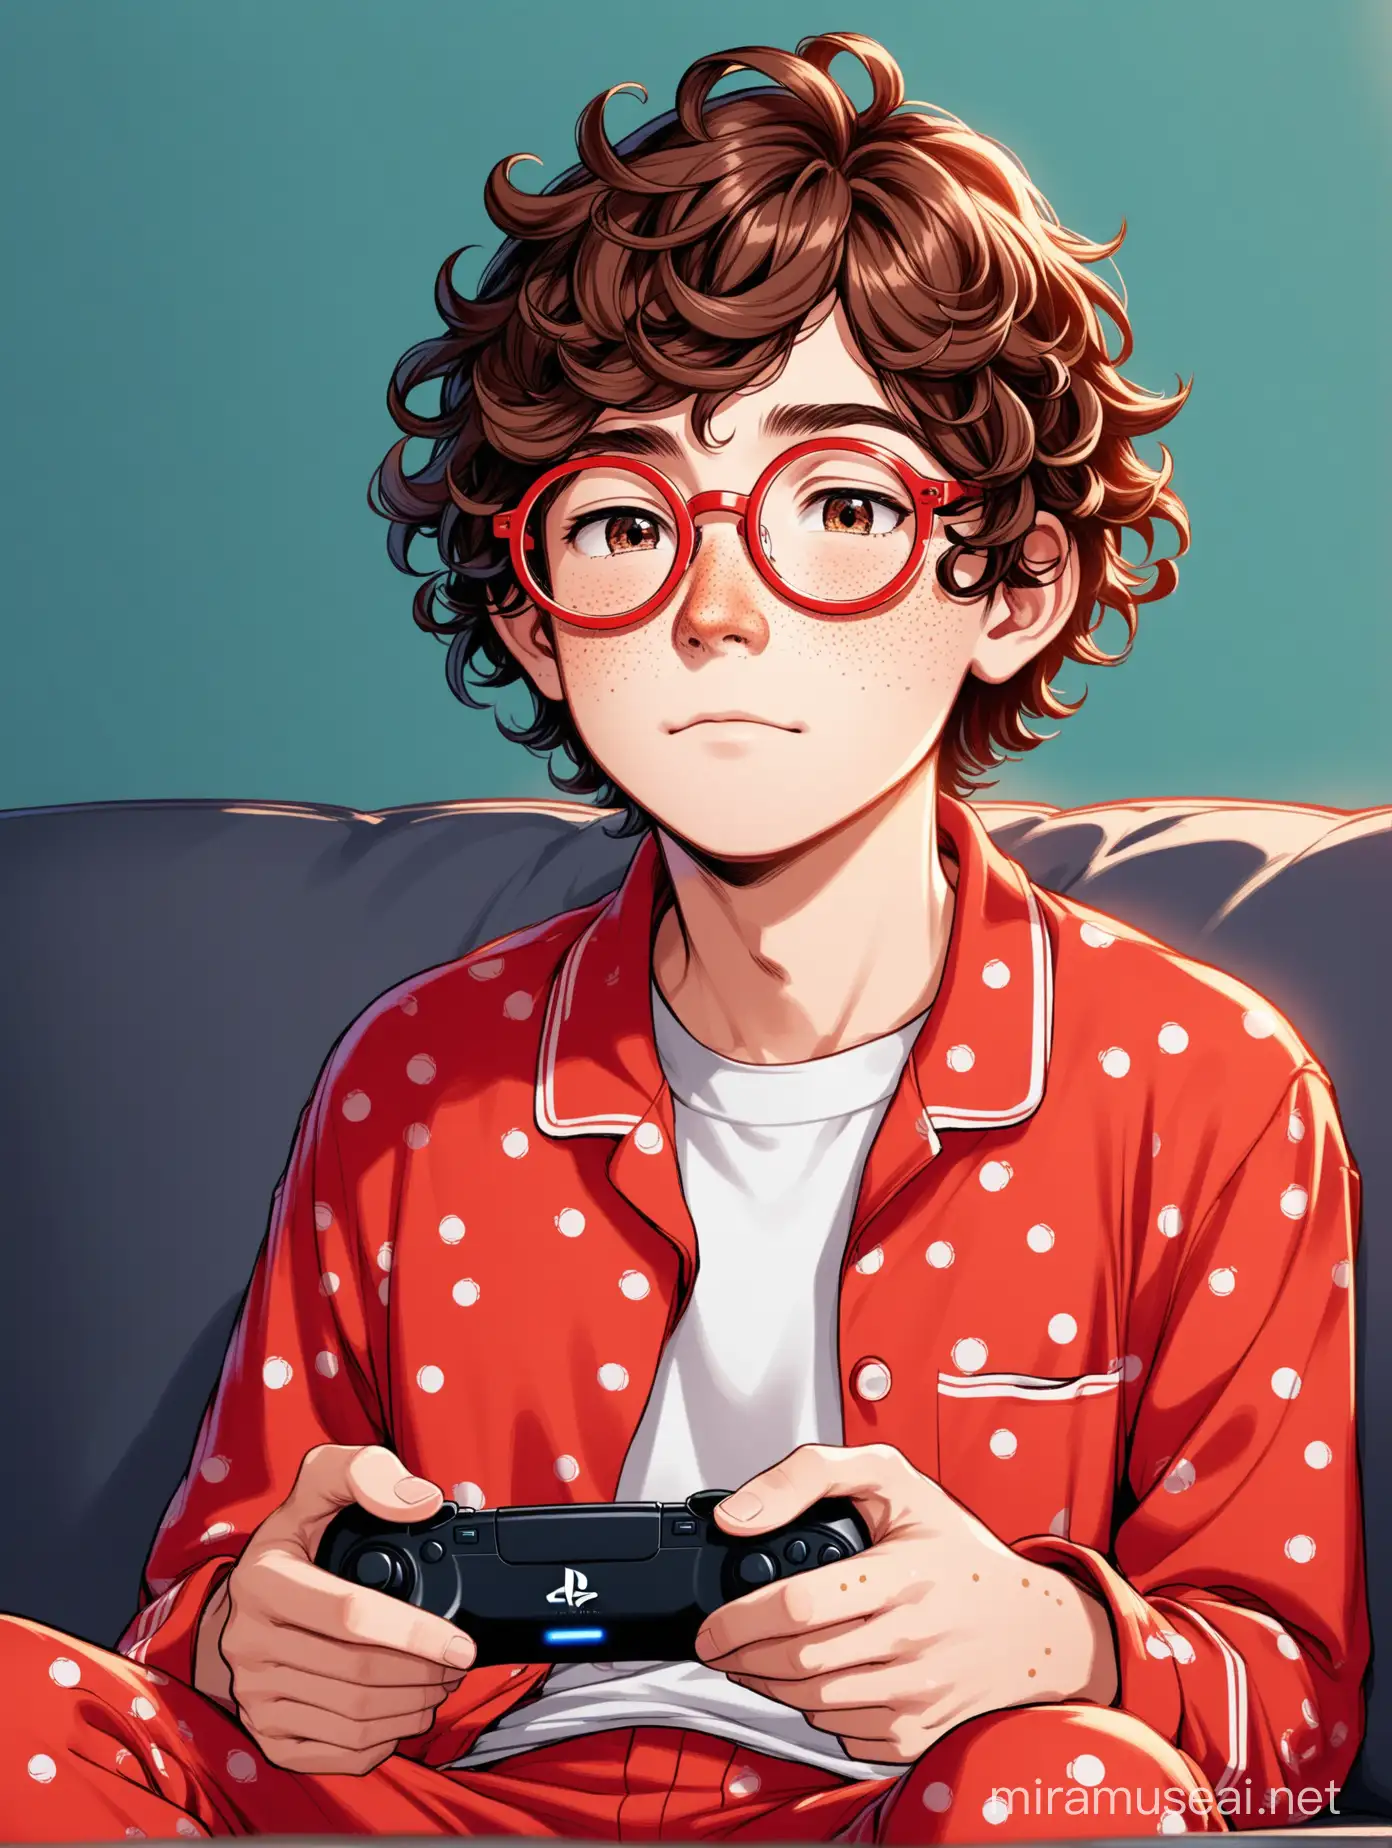 CurlyHaired Teenage Boy Playing Video Games on PS5 in Red Pajamas